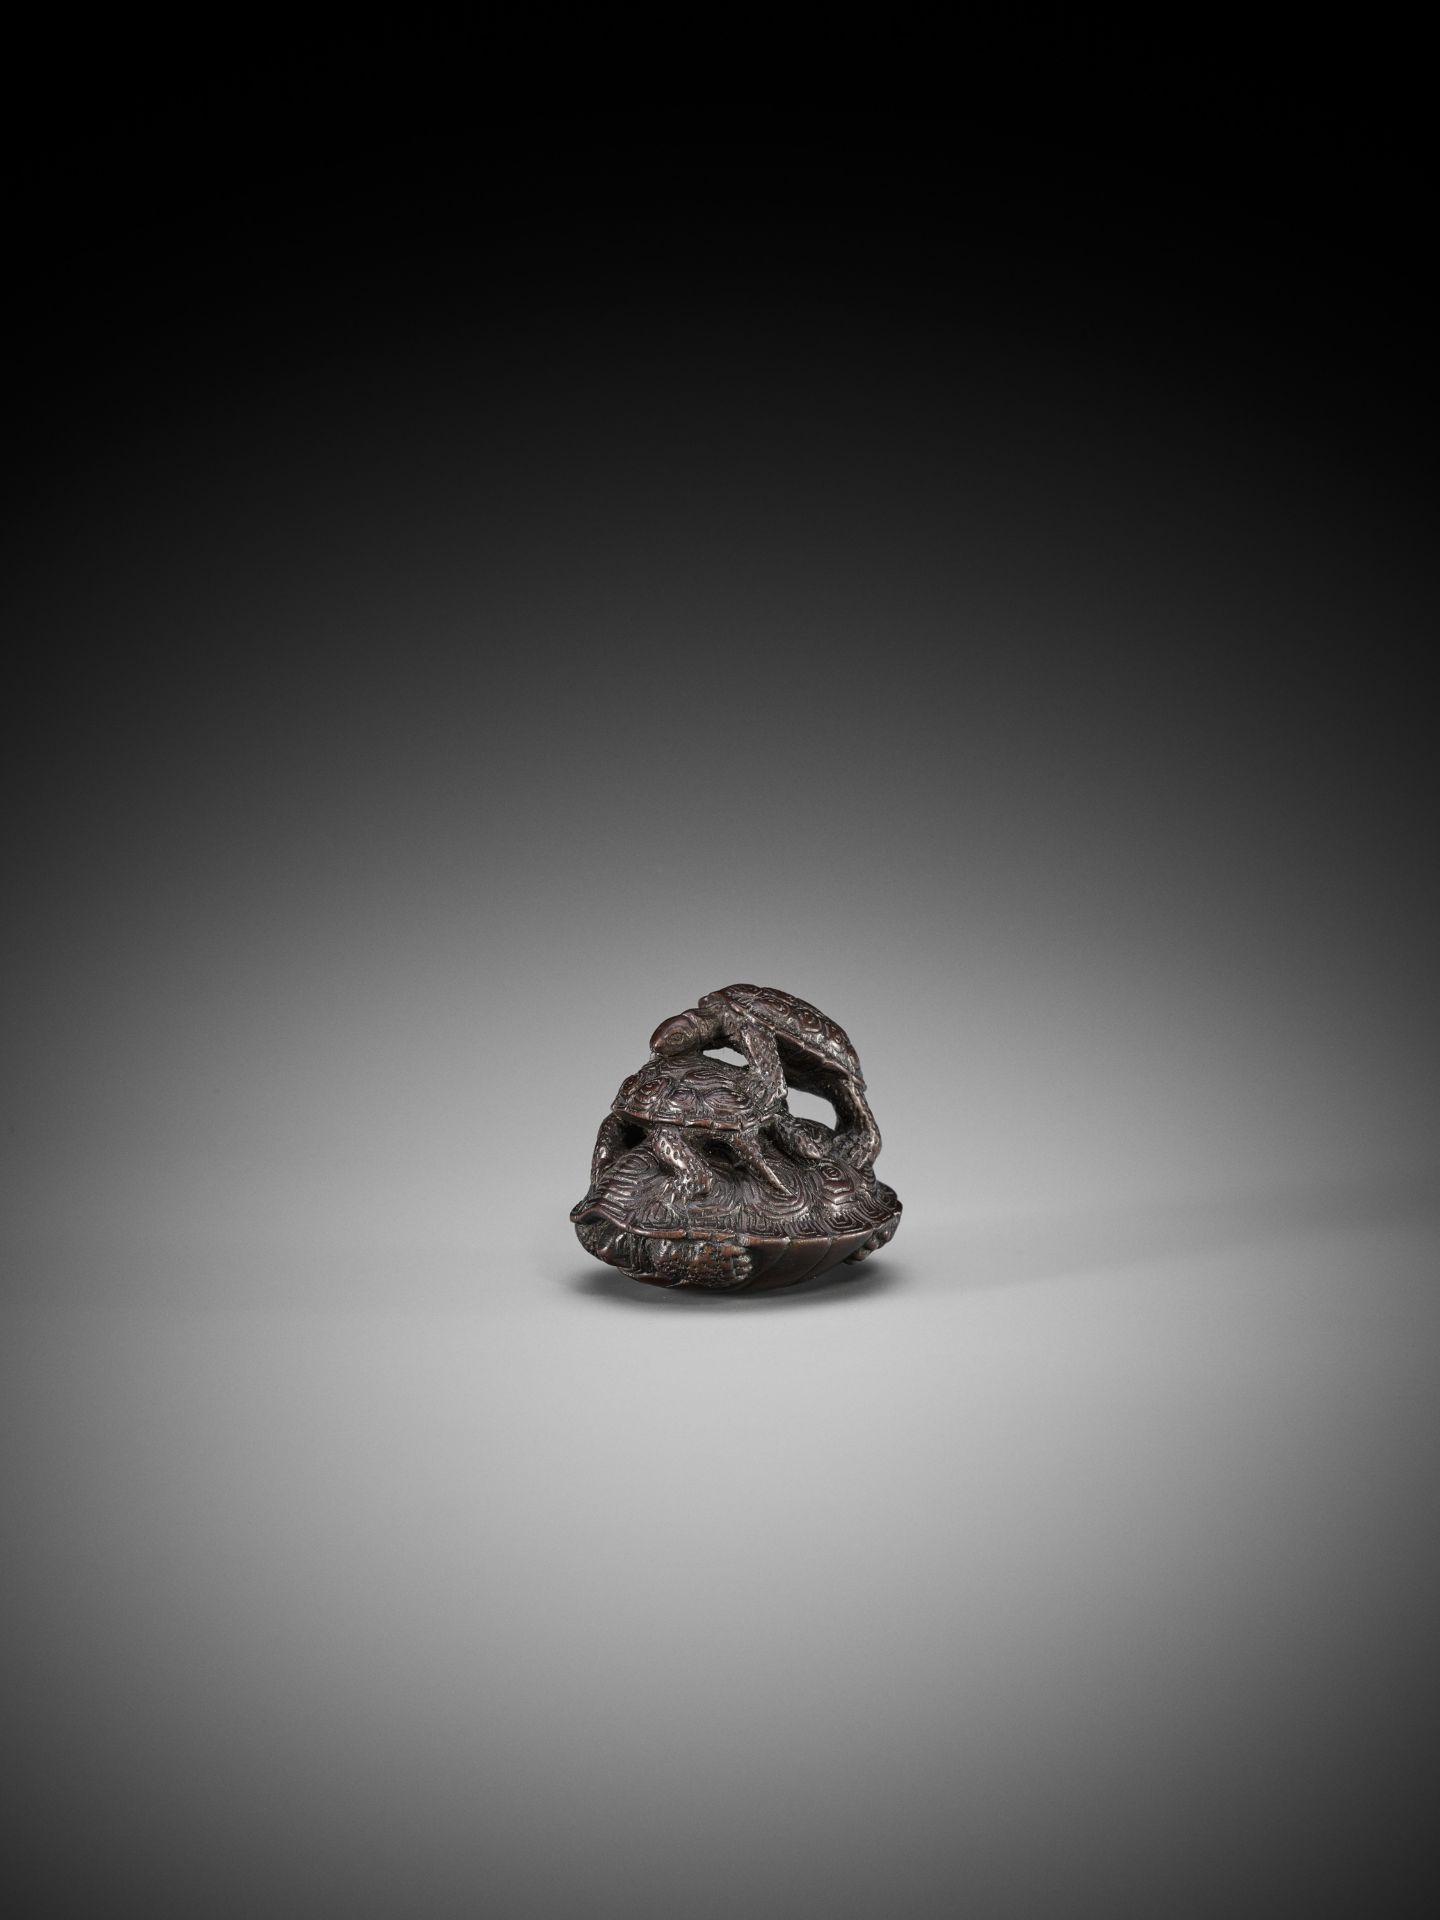 A WOOD NETSUKE OF A THREE TURTLES IN A PYRAMID - Image 5 of 8